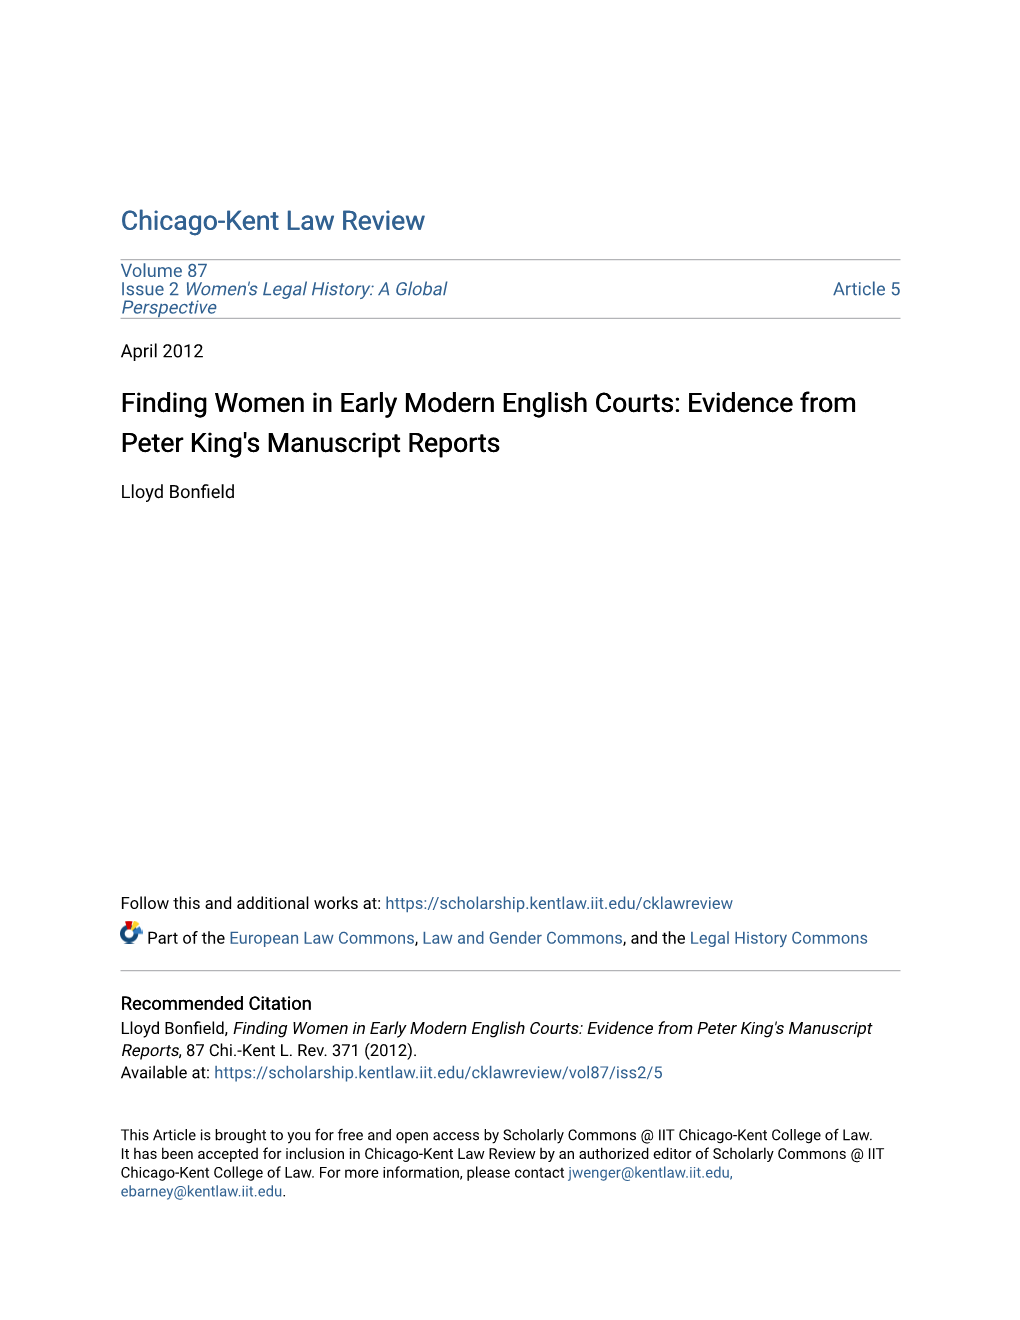 Finding Women in Early Modern English Courts: Evidence from Peter King's Manuscript Reports